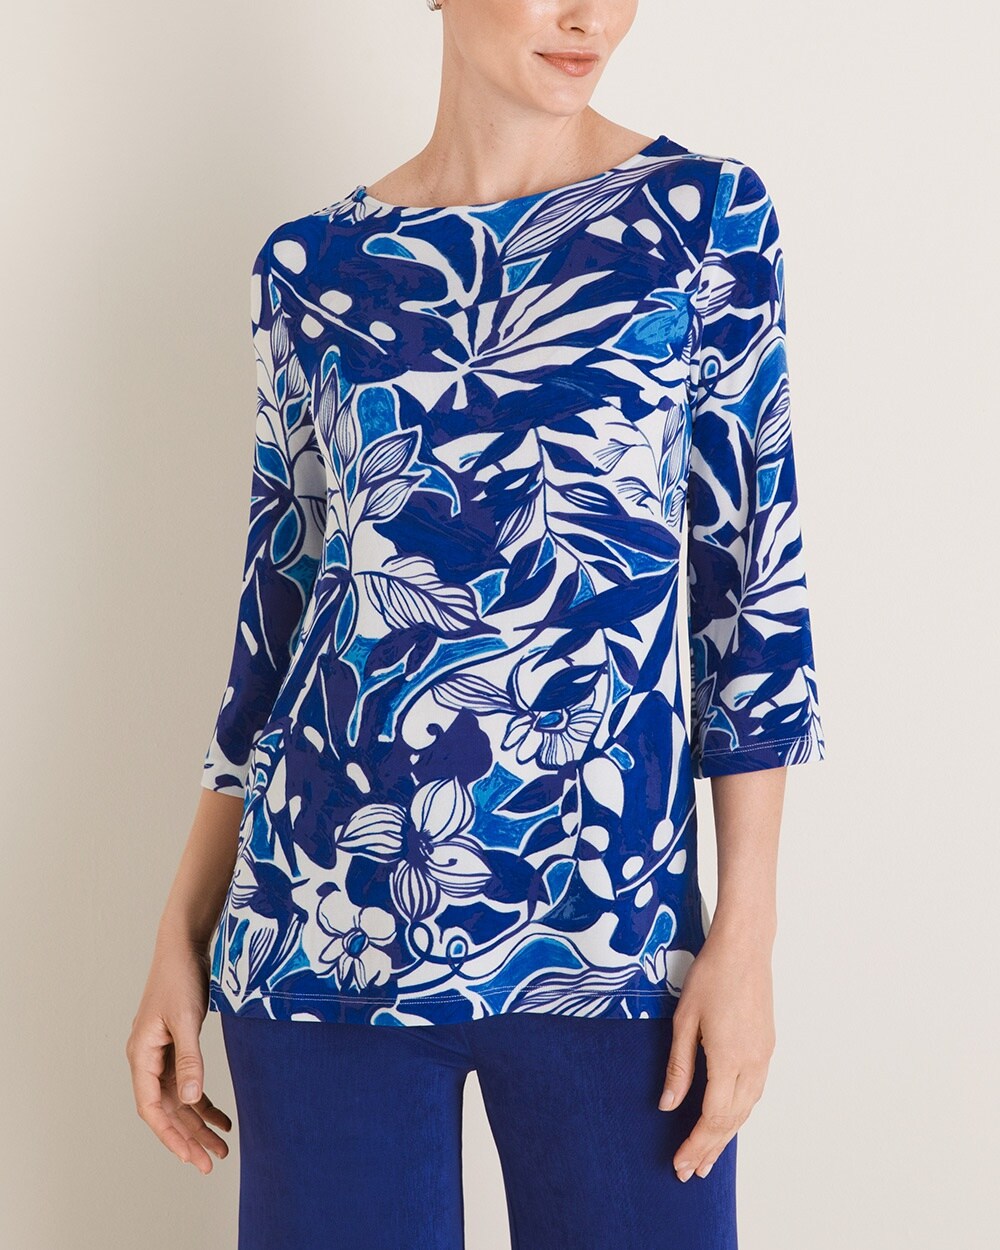 Travelers Classic Printed Bell-Sleeve Tunic